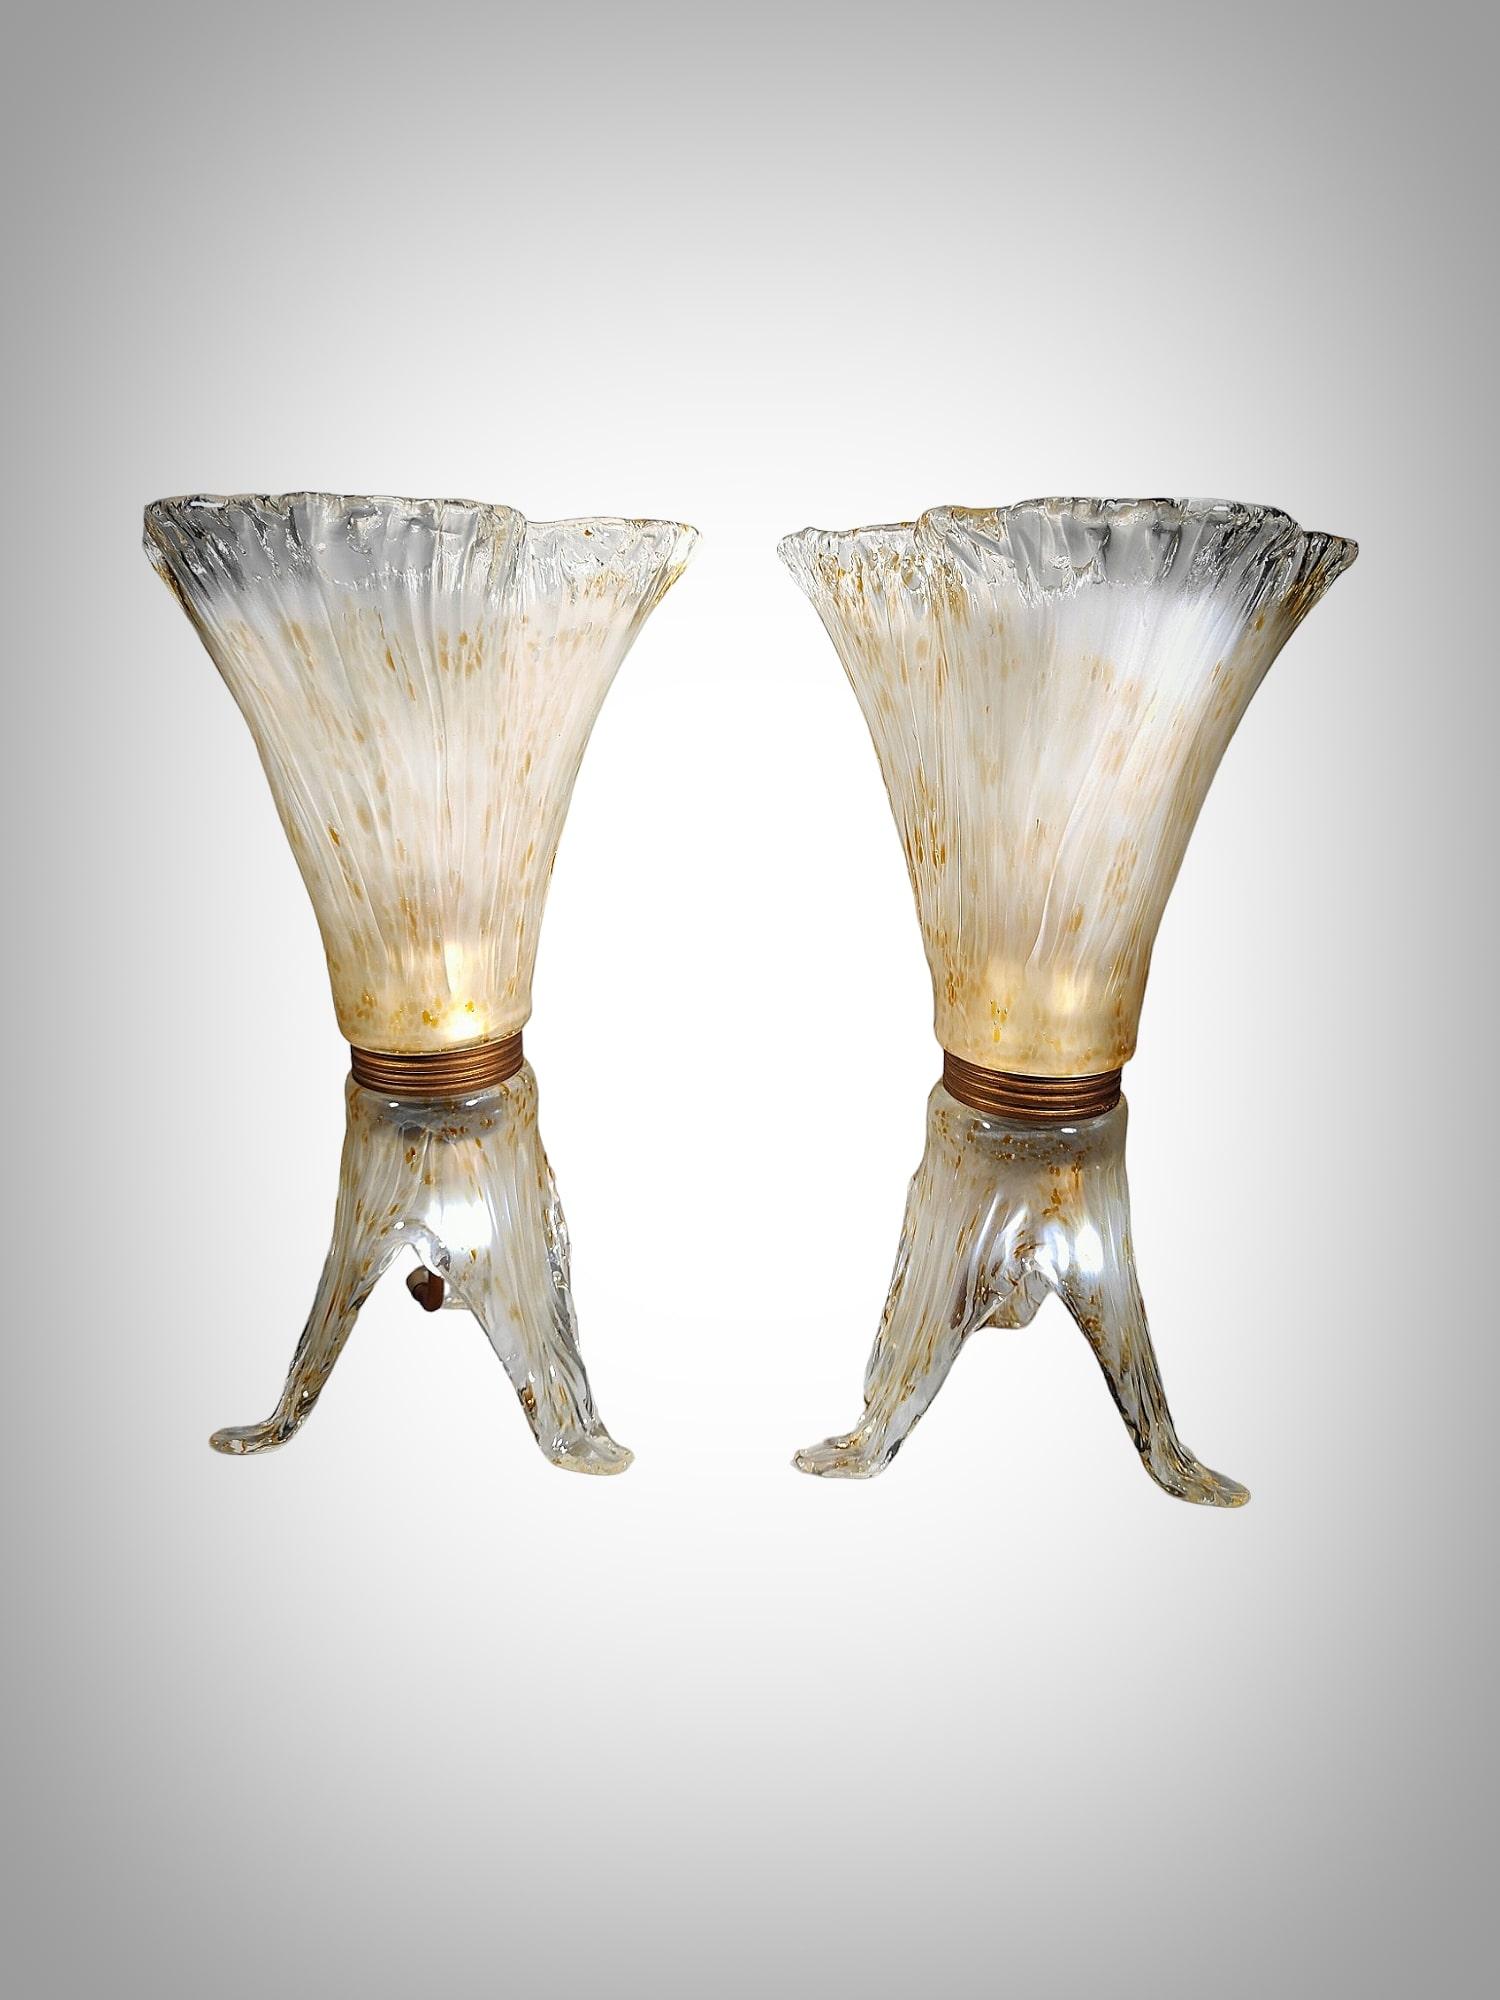 Elegant Pair of Murano Glass Table Lamps - 1970s For Sale 1